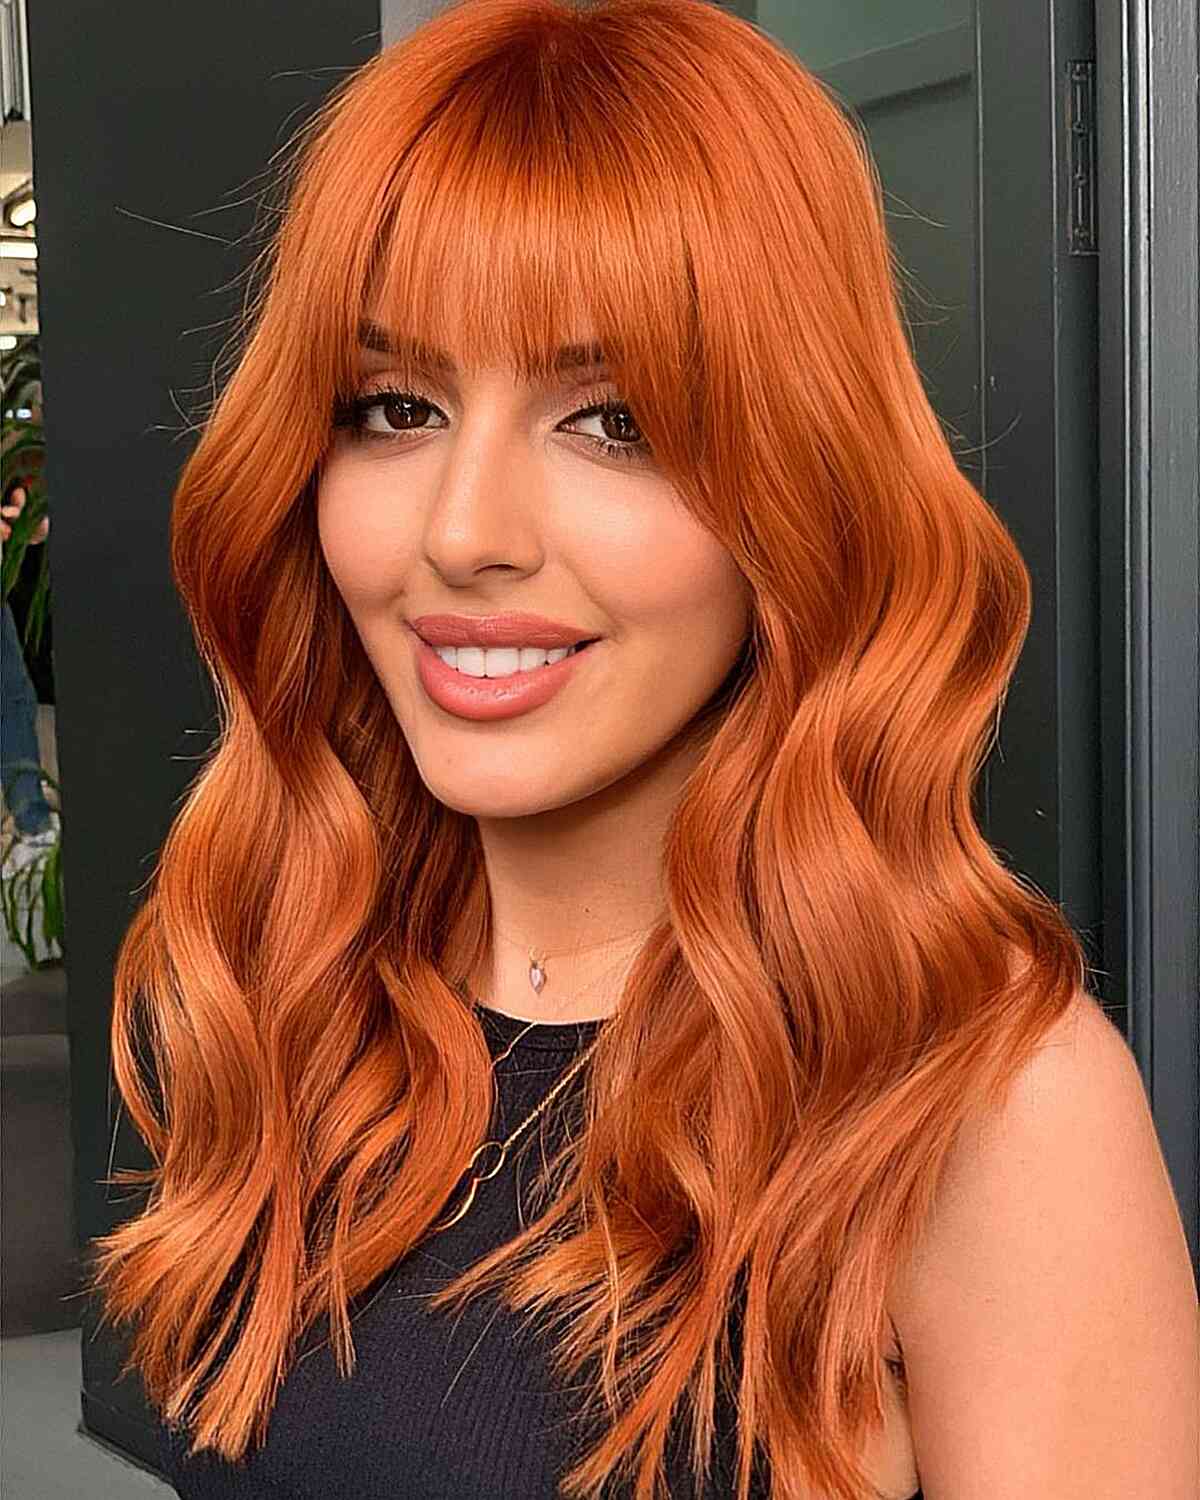 Sunset-Inspired Red Hair with Wispy Bangs